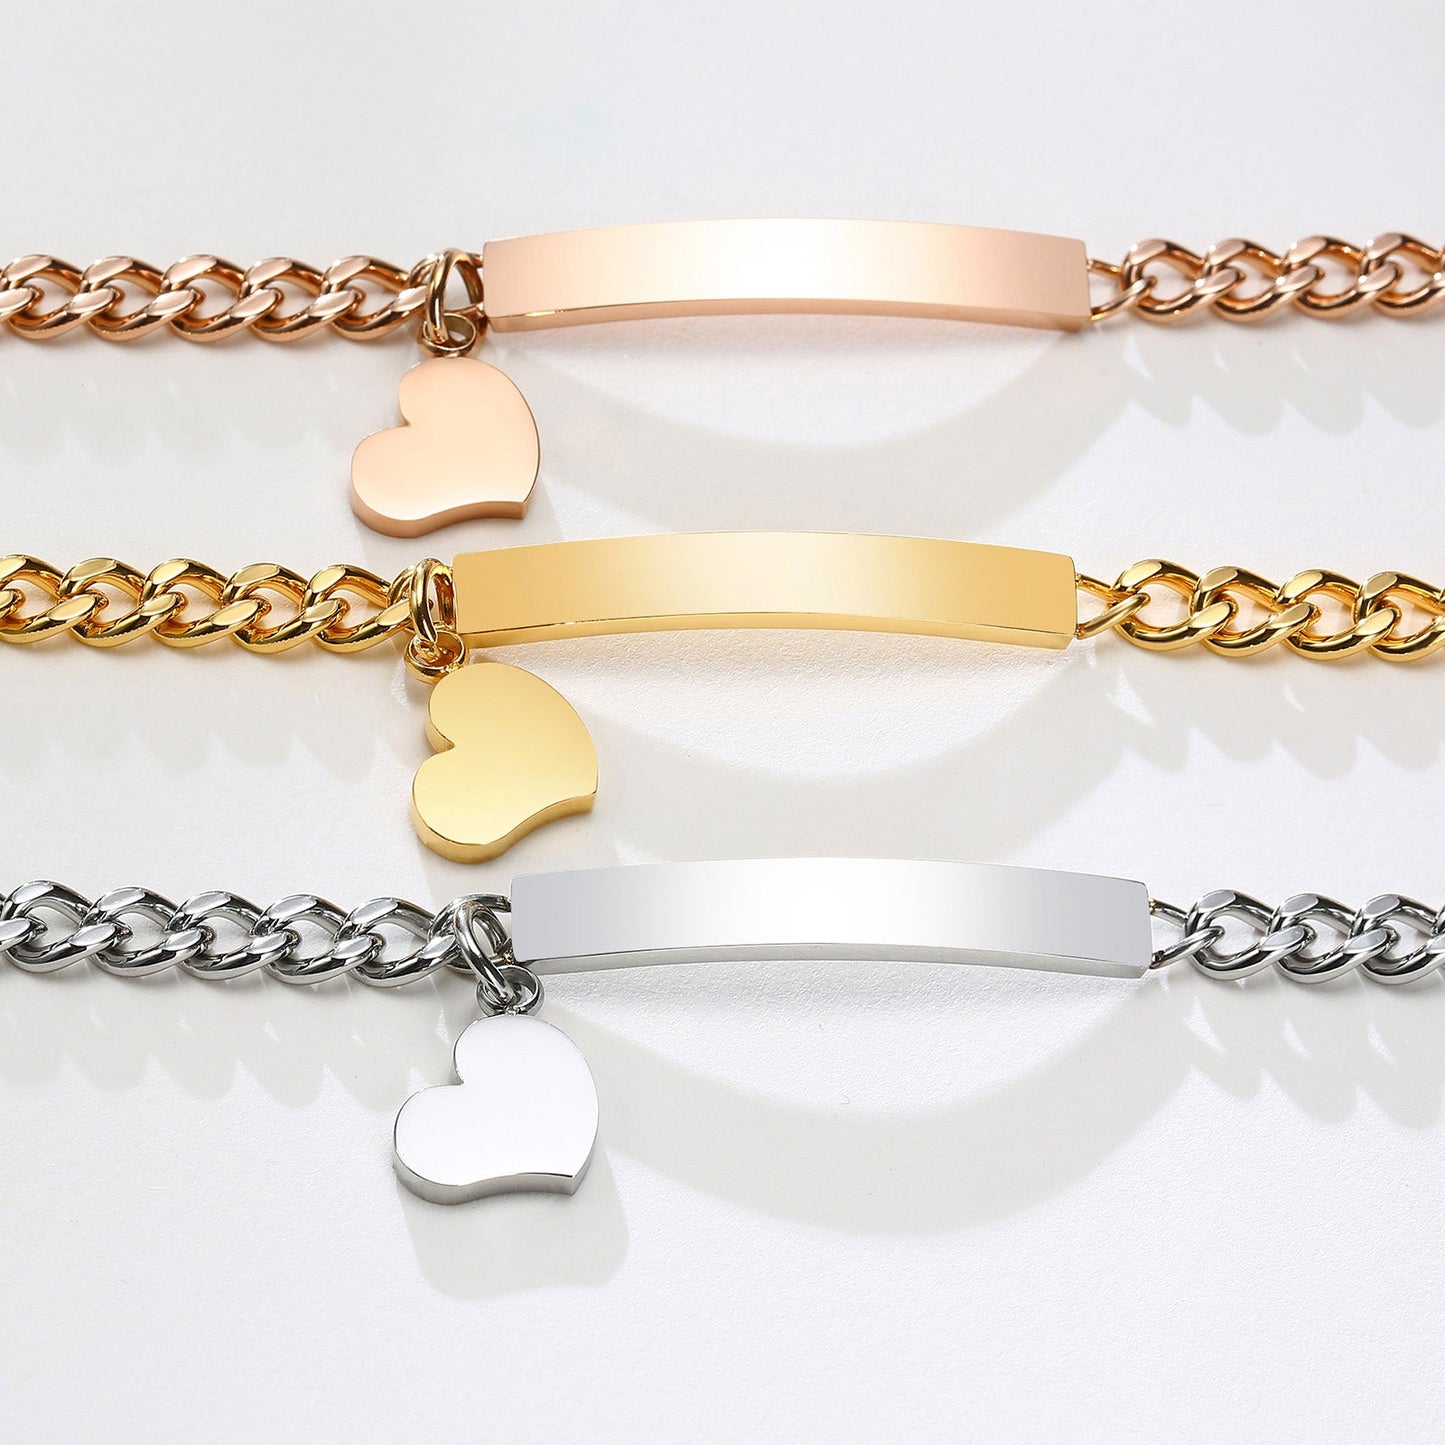 Baby and Children's Bracelets:  Steel with Rose Gold IP Engravable Bracelets with Heart Charm Age 3 Months to 5 Years